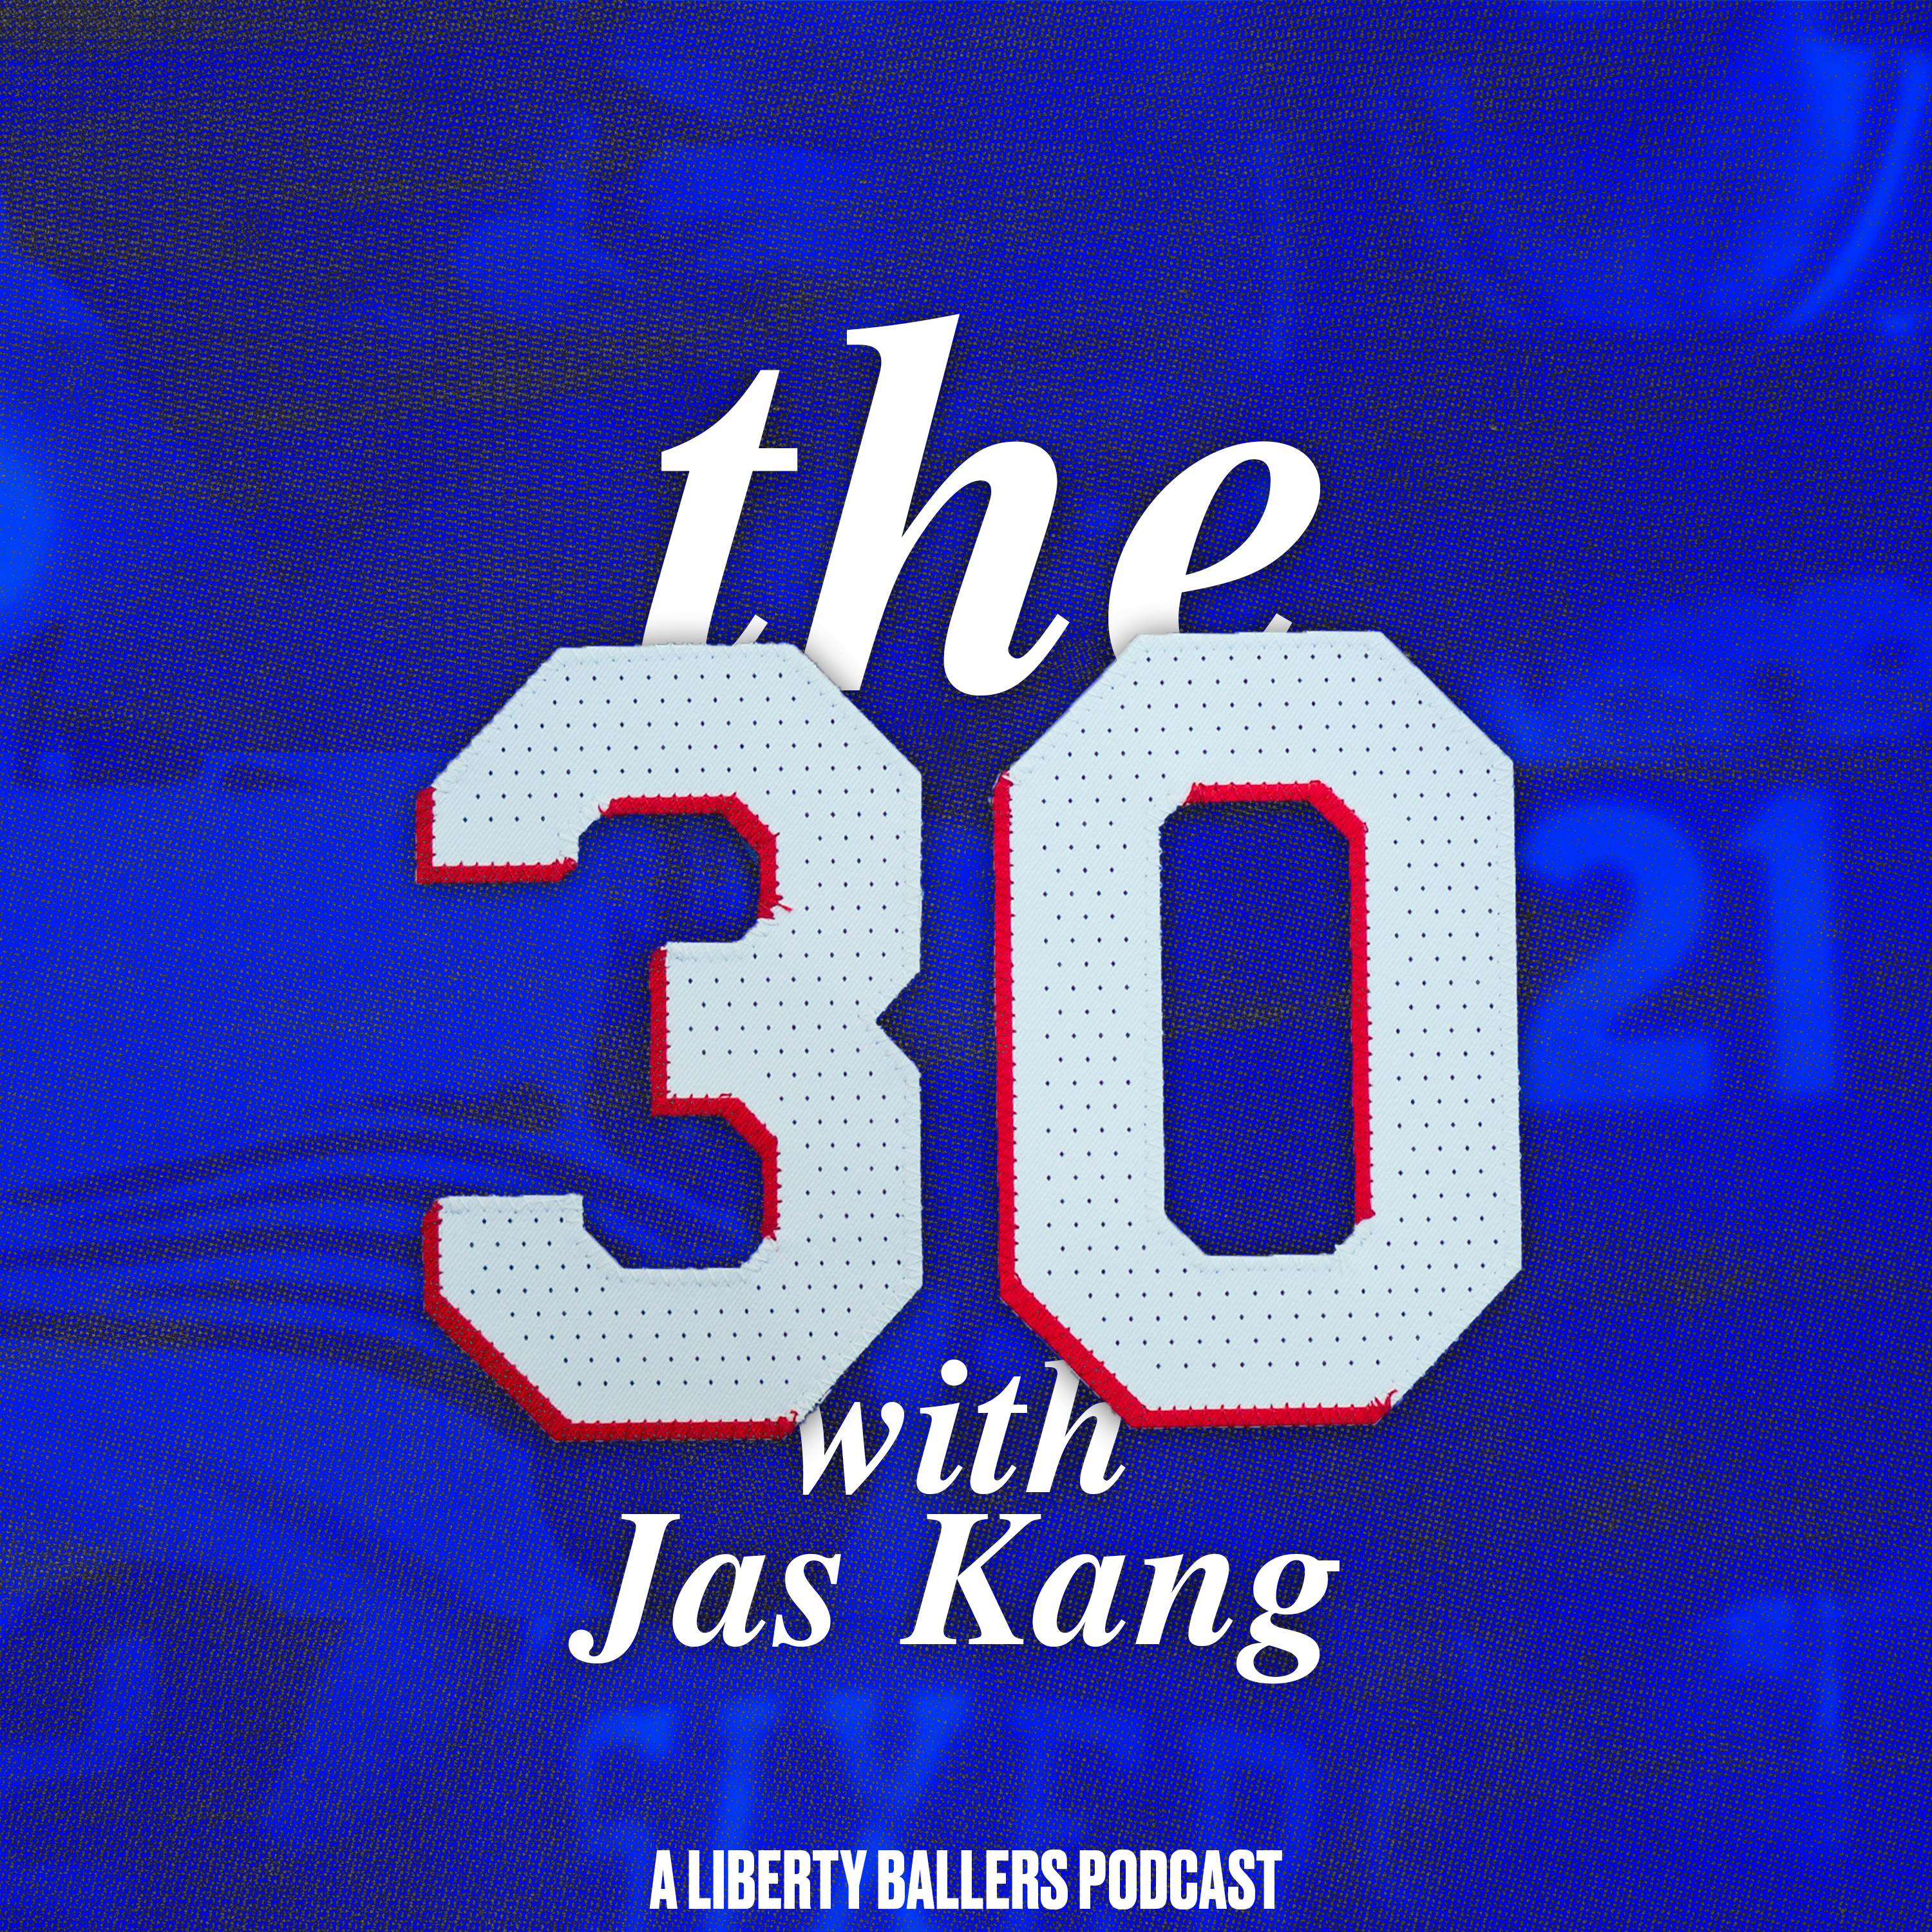 The 30: The Sixers are 7-7 heading into a showdown against the Bucks, the offense is sputtering but the defense is good, plus Ben Simmons returns next week and Kevin Durant isn't happy. With Paul Hudr